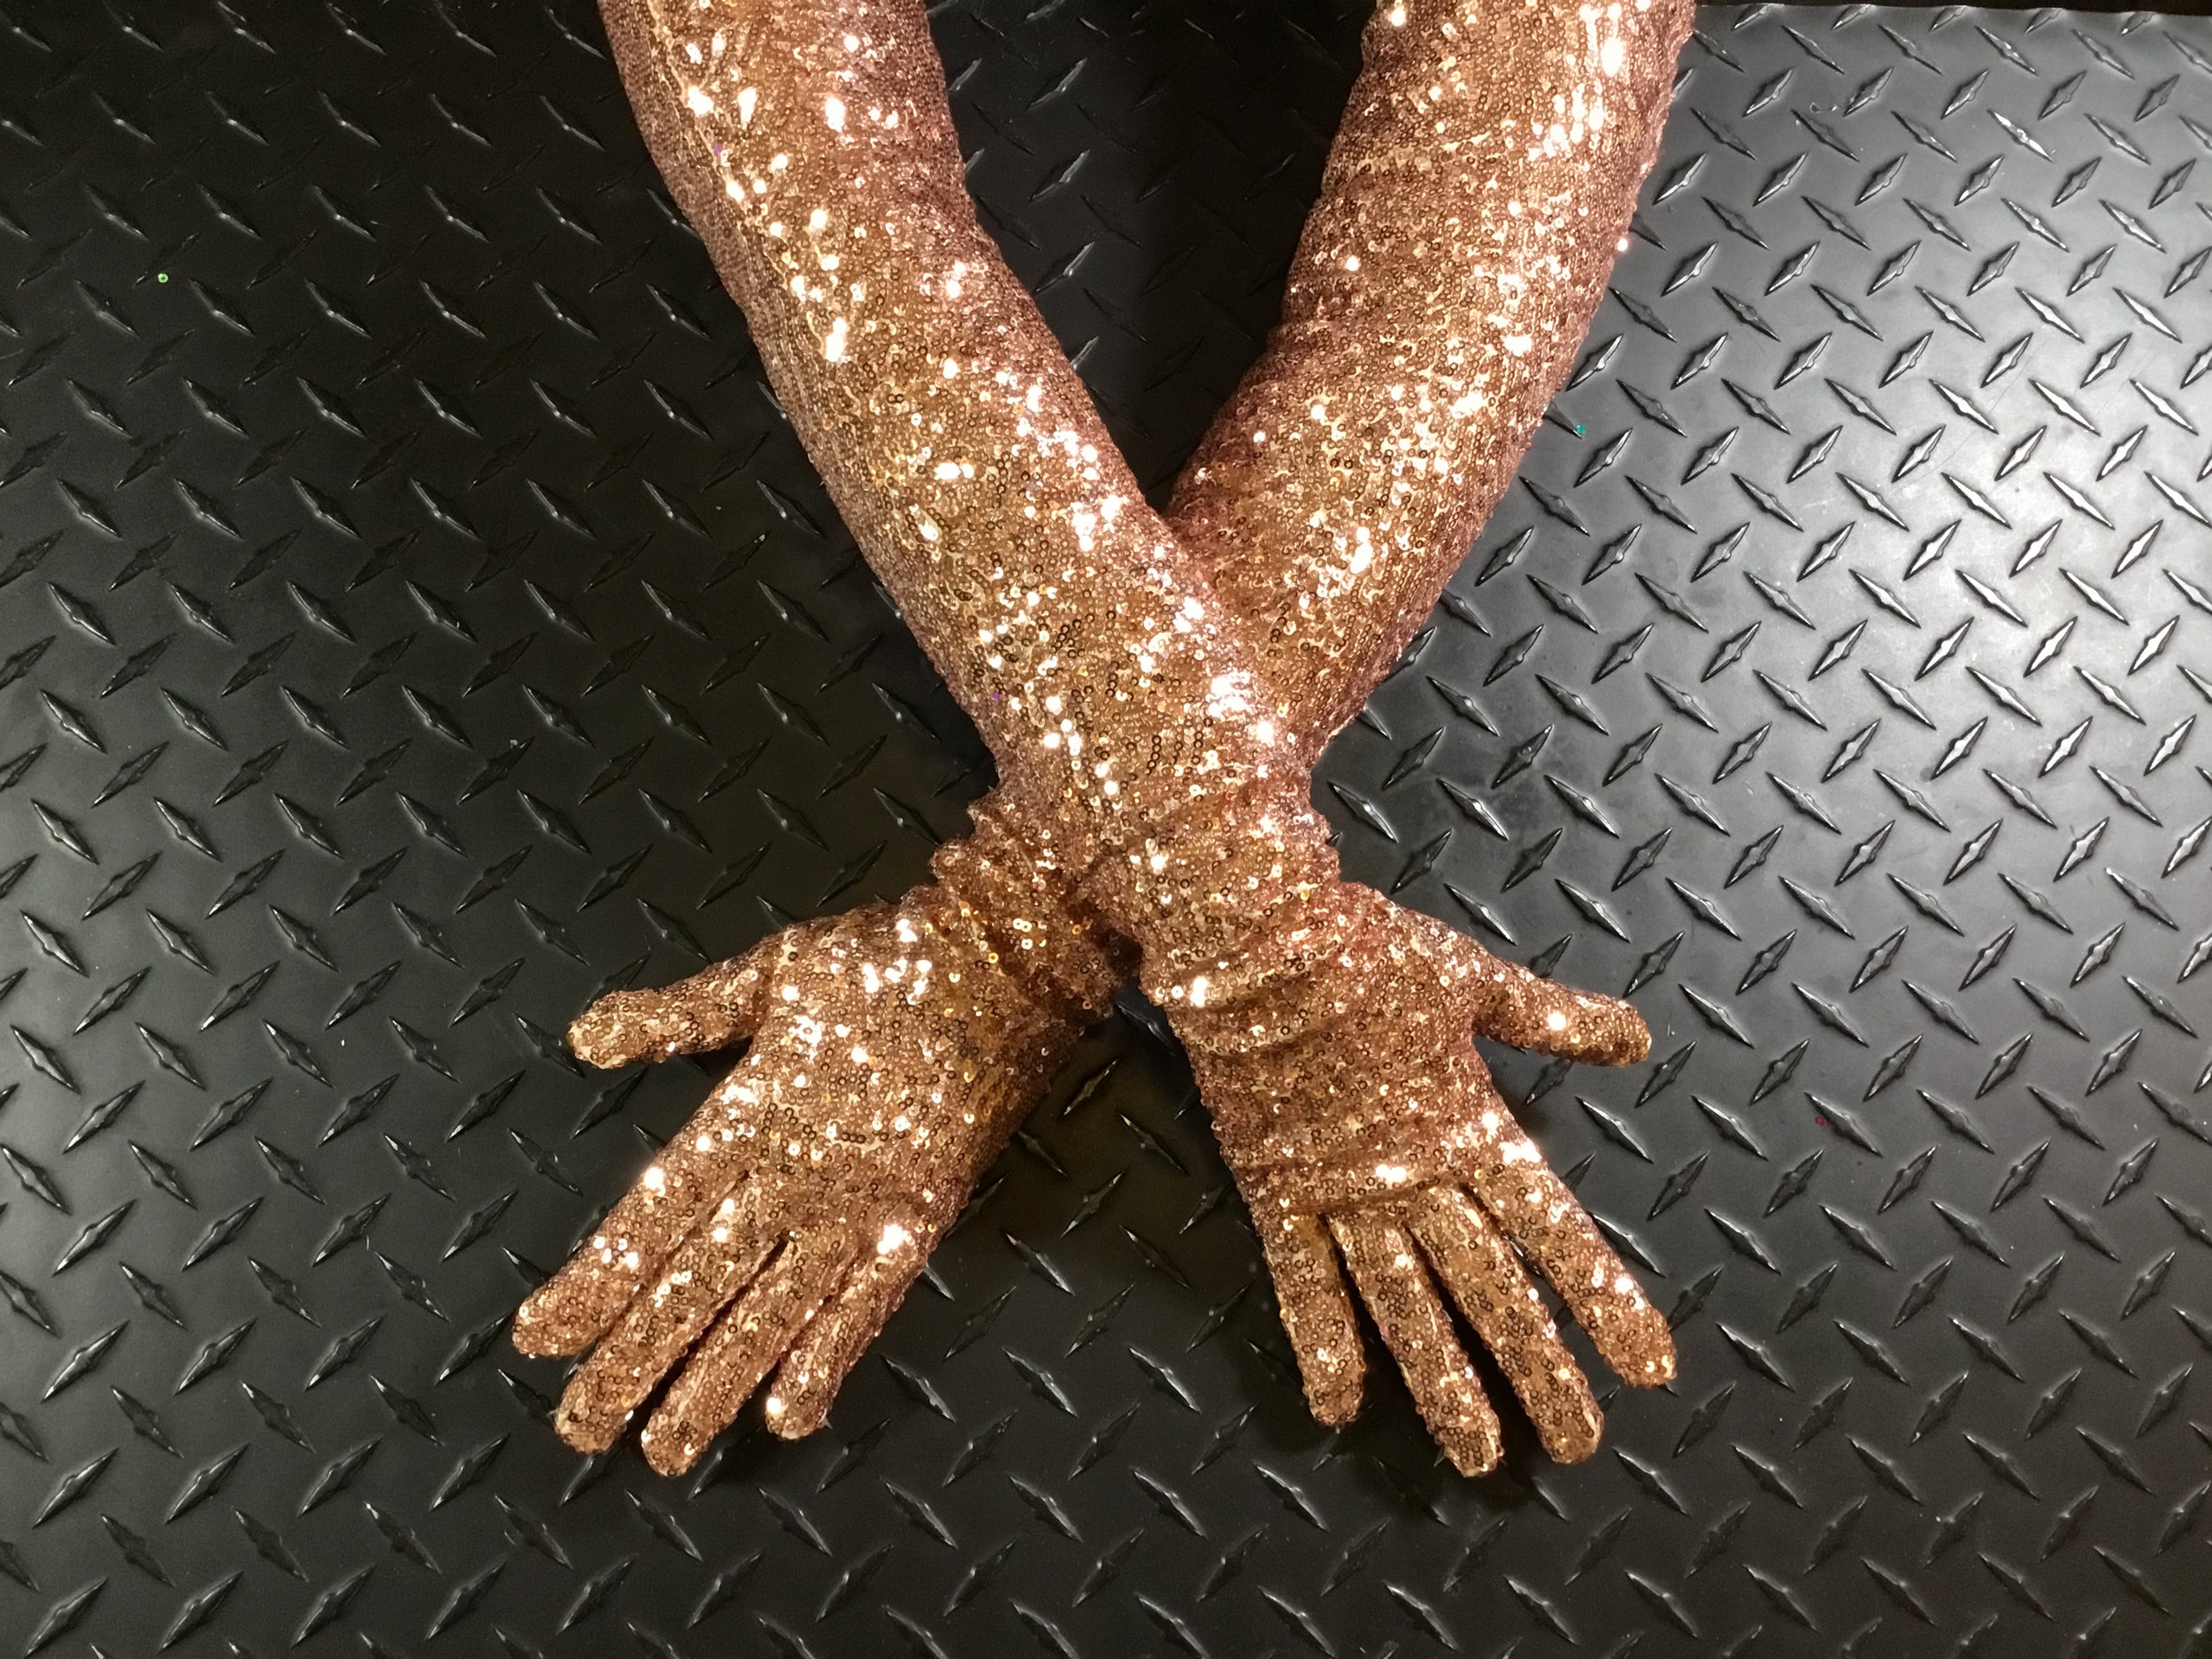 The Sequined Glove That Mesmerized the World - The New York Times